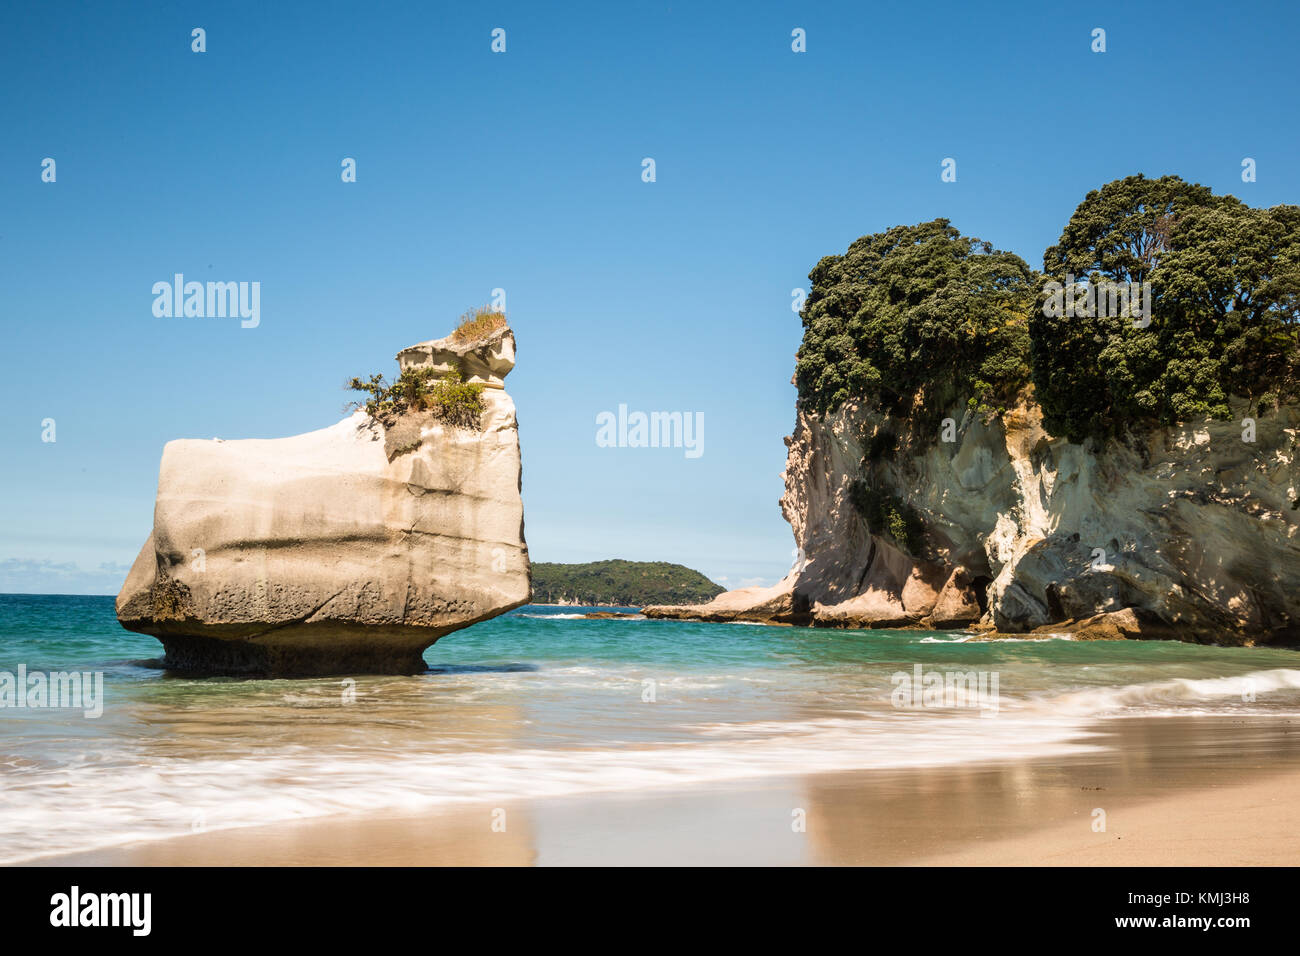 A sea stack, a section of rock formerly attached to the main land formation and separated by erosion, stands above a sandy beach in the Coromandel reg Stock Photo